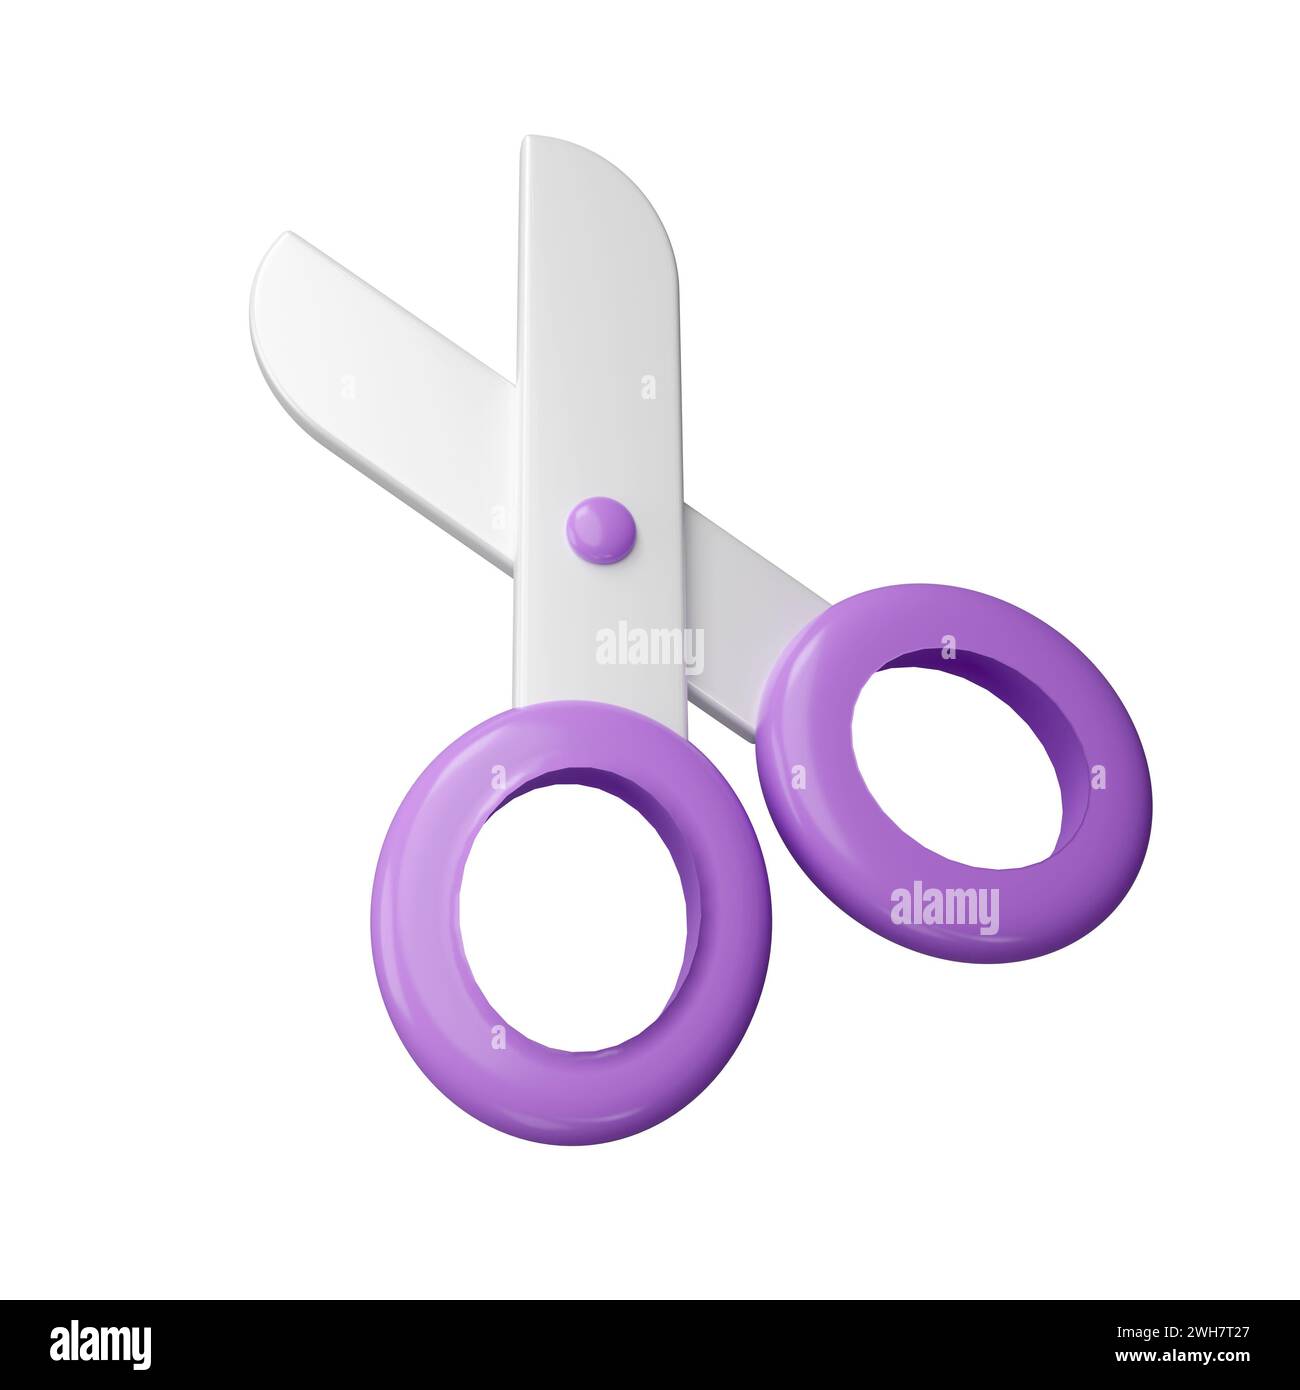 3d scissors. Education, medicine, hairdressing supplies, stationery. icon isolated on background, icon symbol clipping path. 3d render illustration Stock Photo